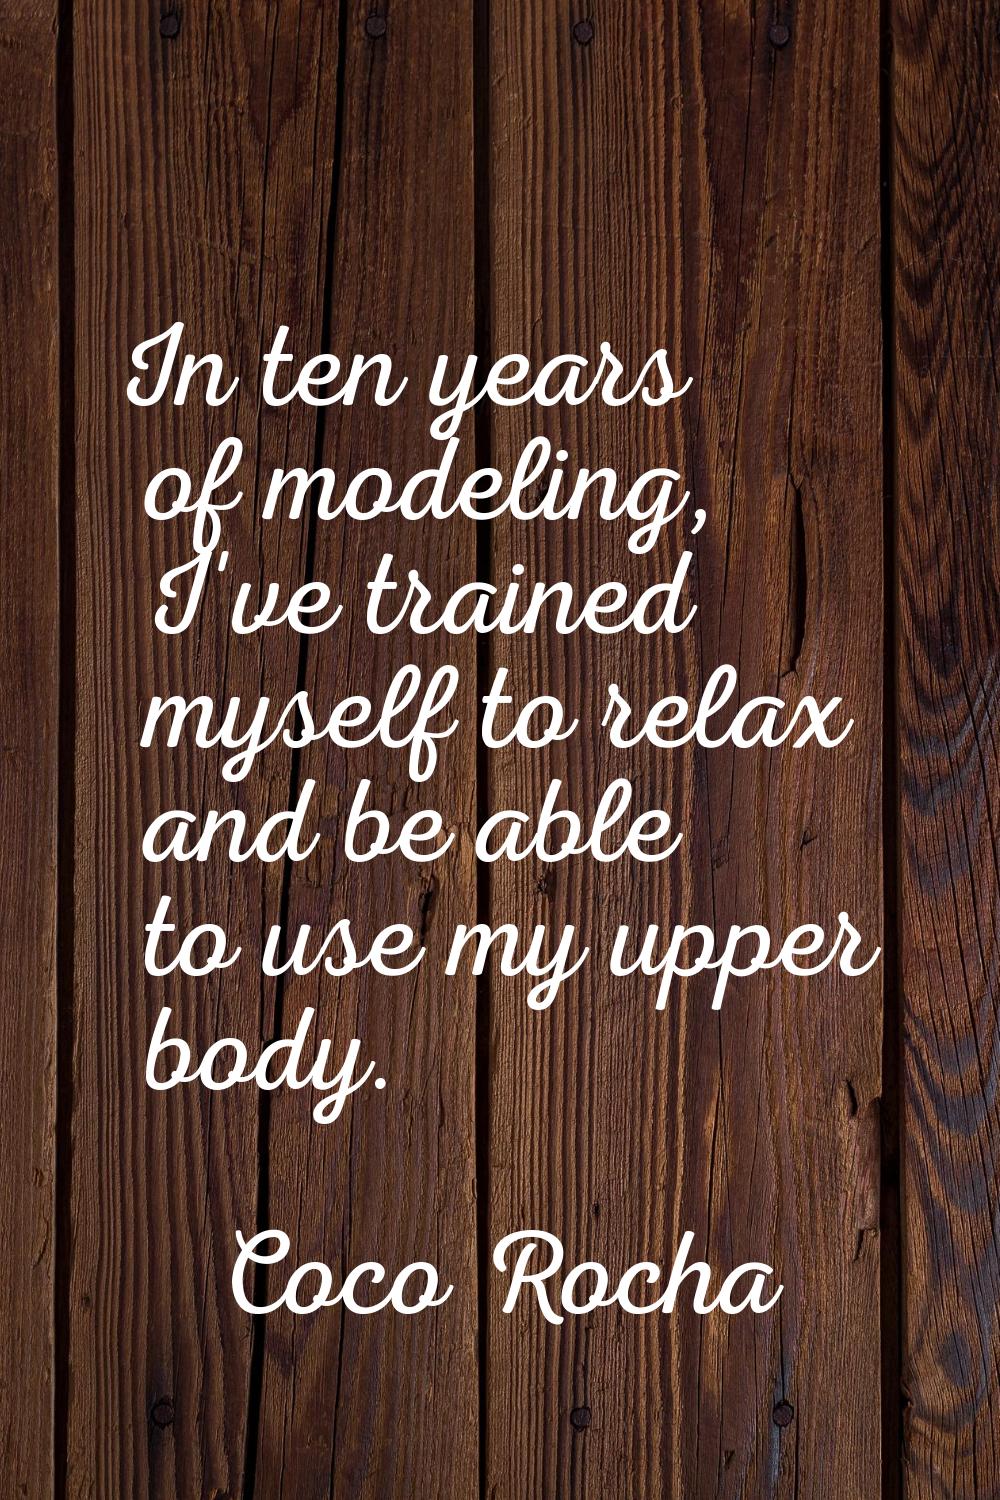 In ten years of modeling, I've trained myself to relax and be able to use my upper body.